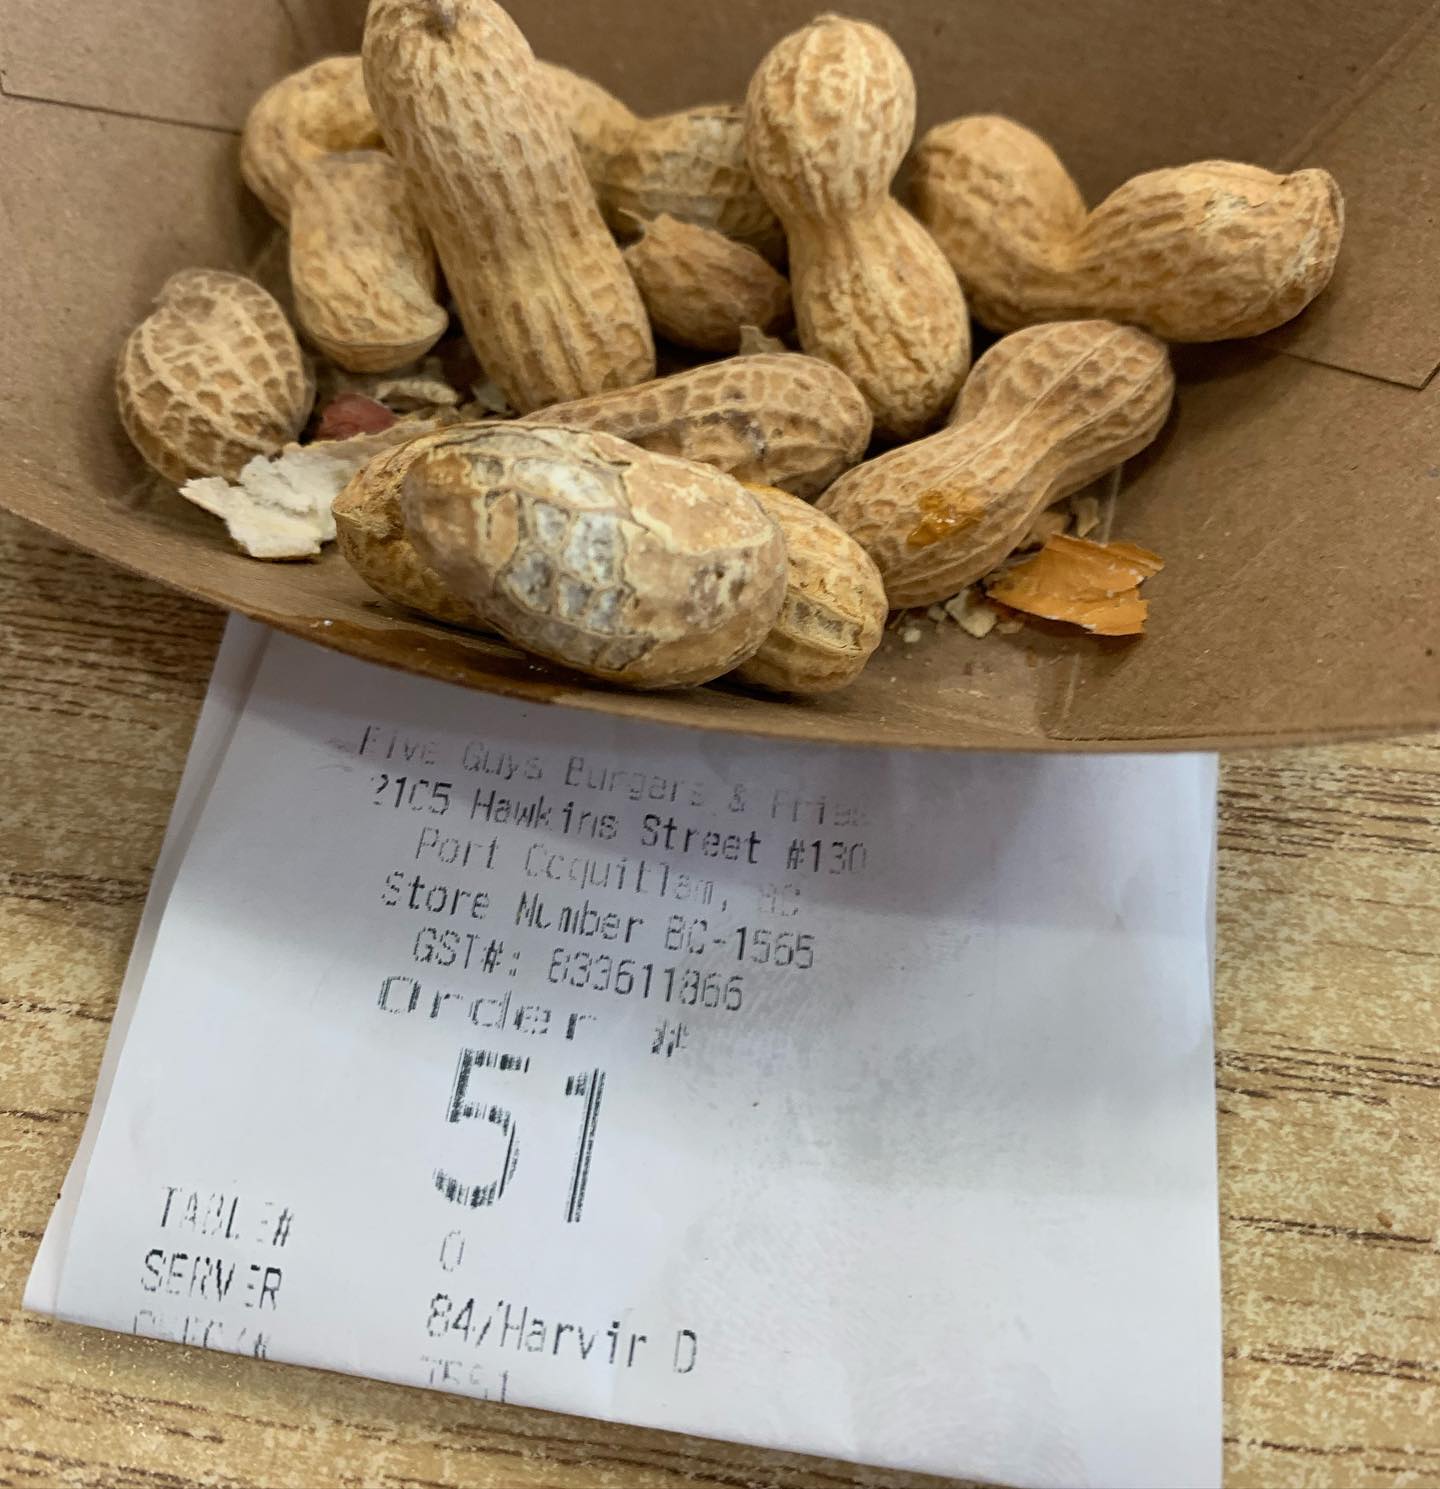 Daughter and I were talking about Area 51 on our way to lunch.

We get to @fiveguys and this is our order number. Coincidence? I don’t think so!
.
.
.
#burgers #fiveguys #lunch #area51 #fries #delicious #nomnom